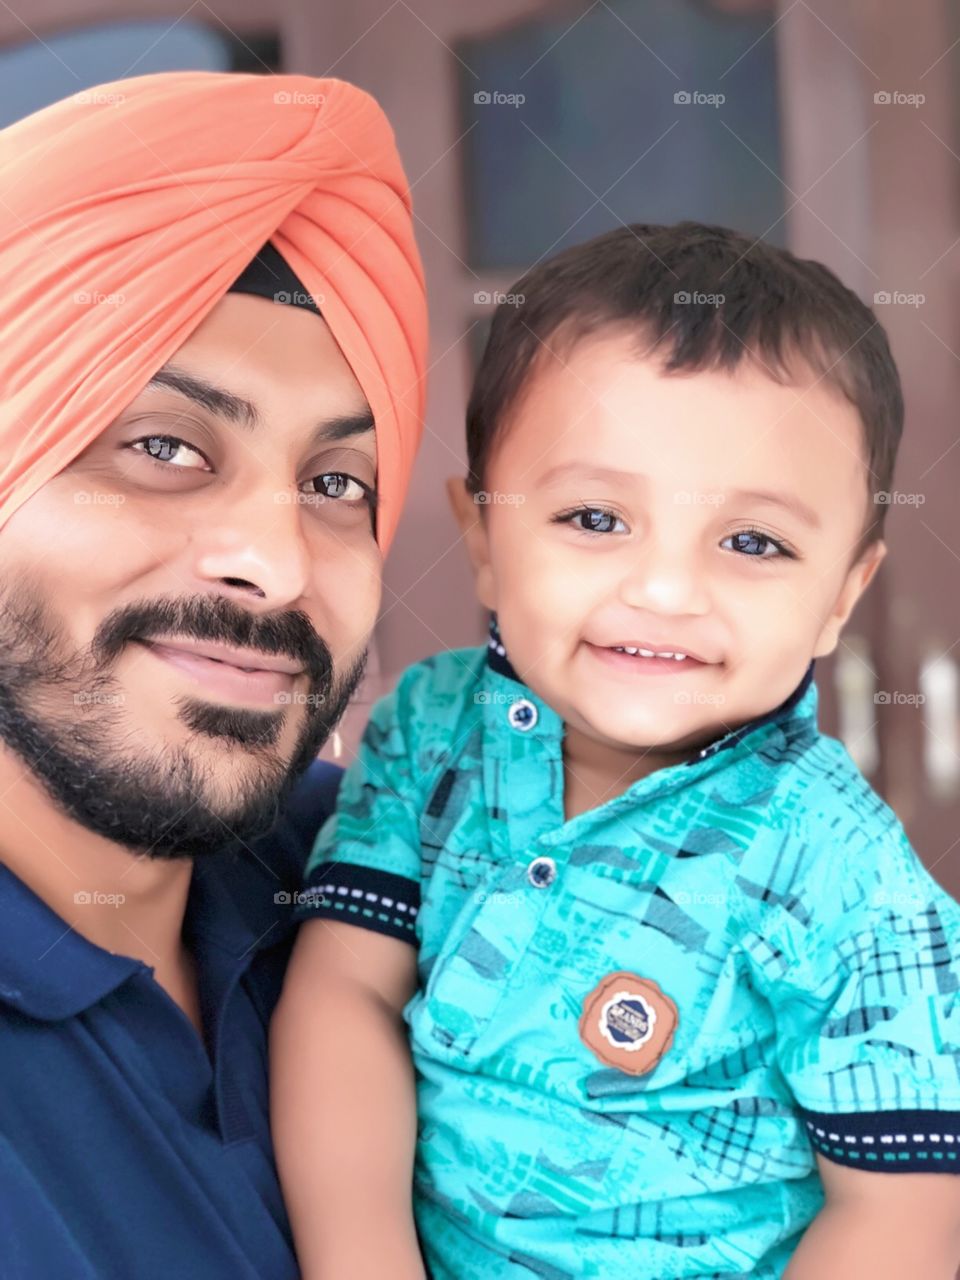 Smile on the face of a child is the best reason for smiling for a father😊